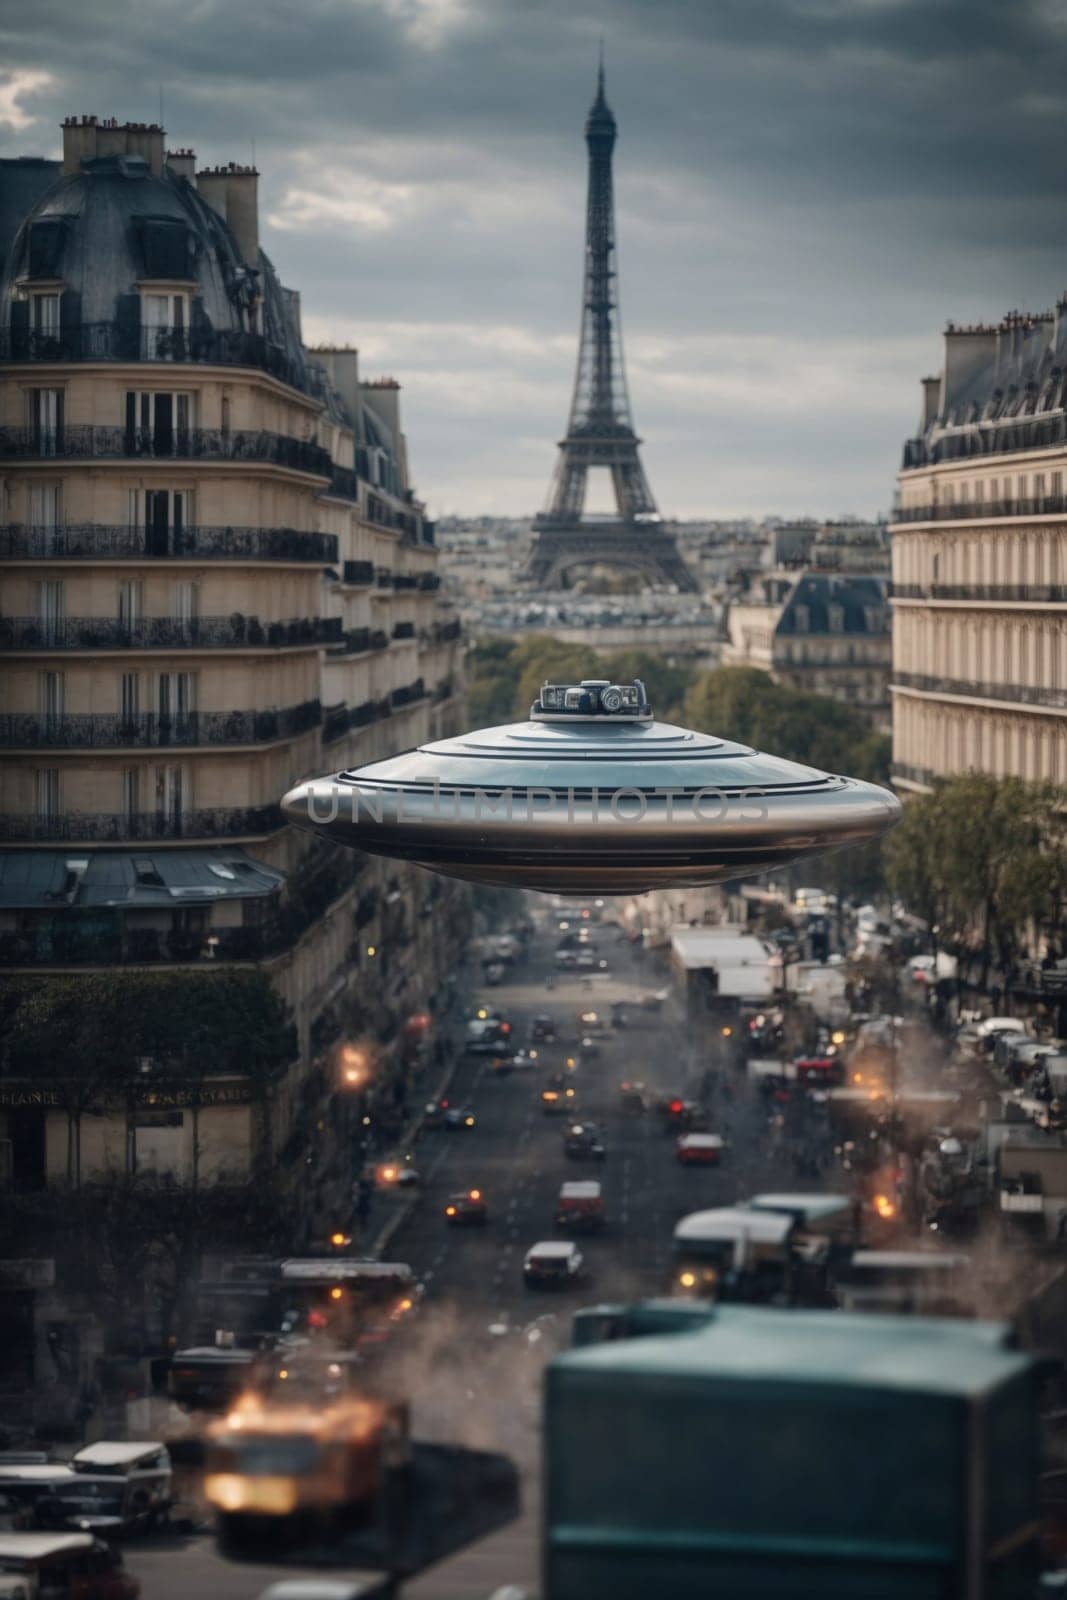 A flying saucer hovers above a teeming city, capturing the attention of onlookers with its otherworldly presence.